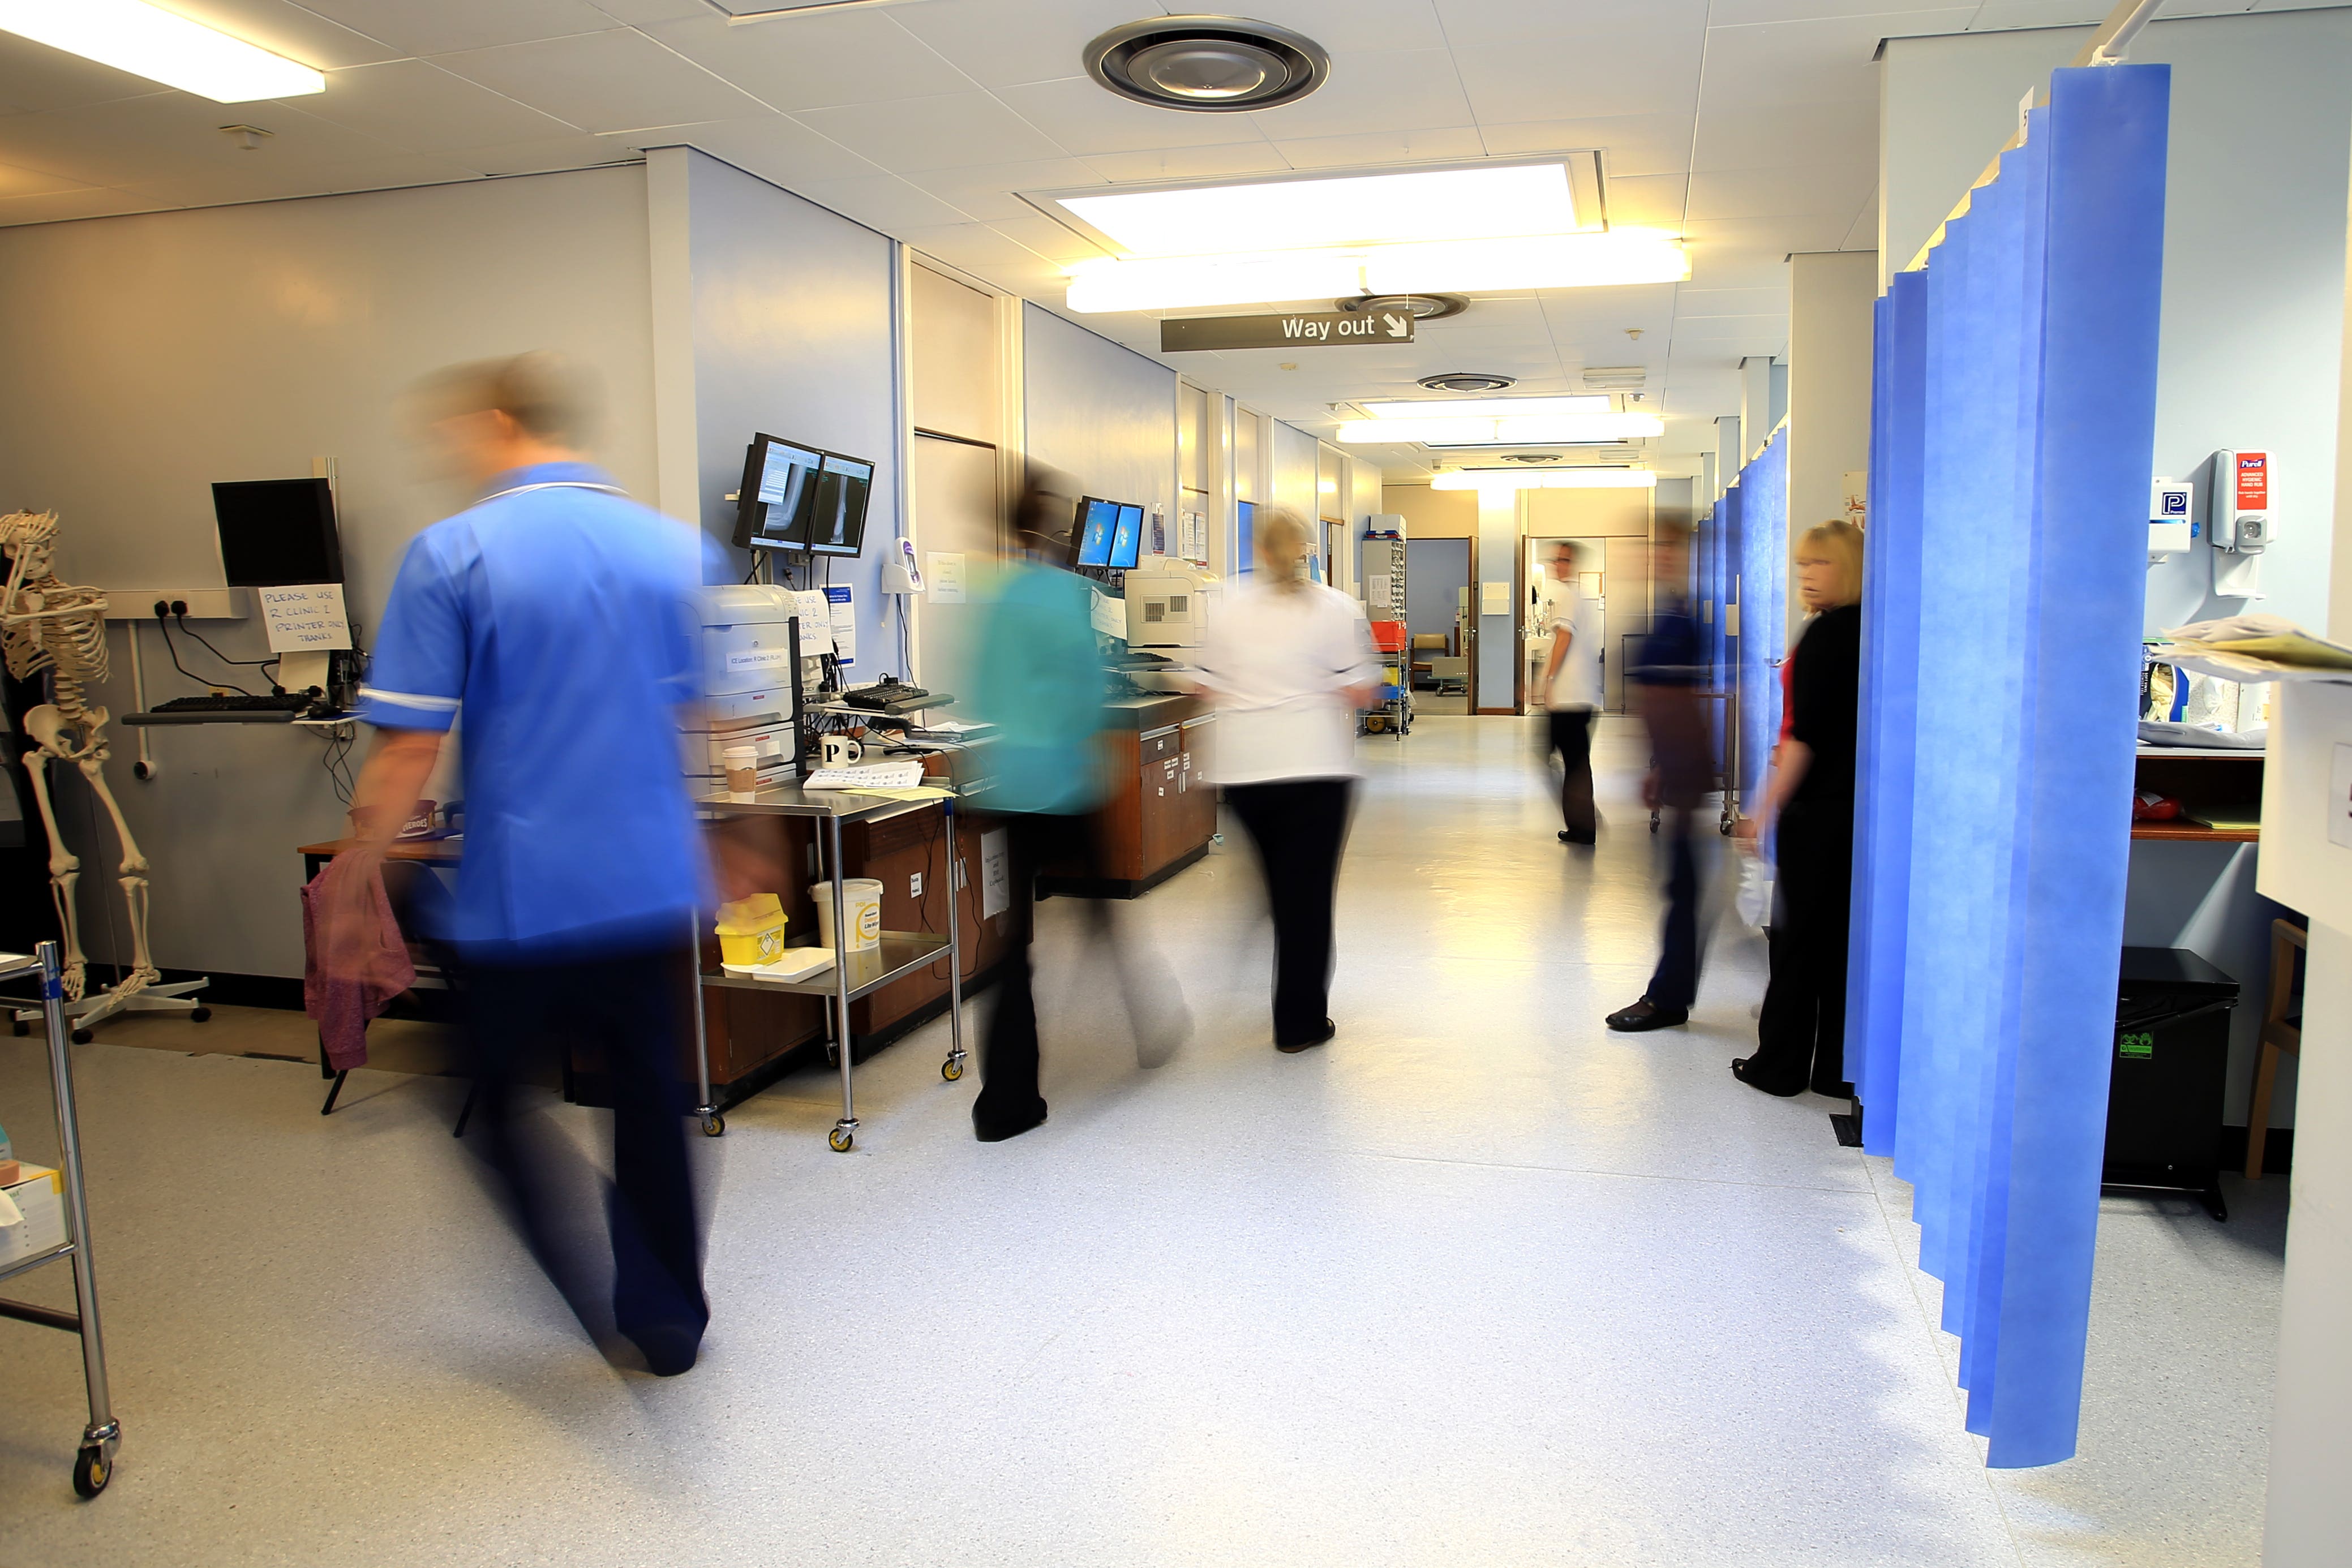 More than 40,000 have left the health service in the past year